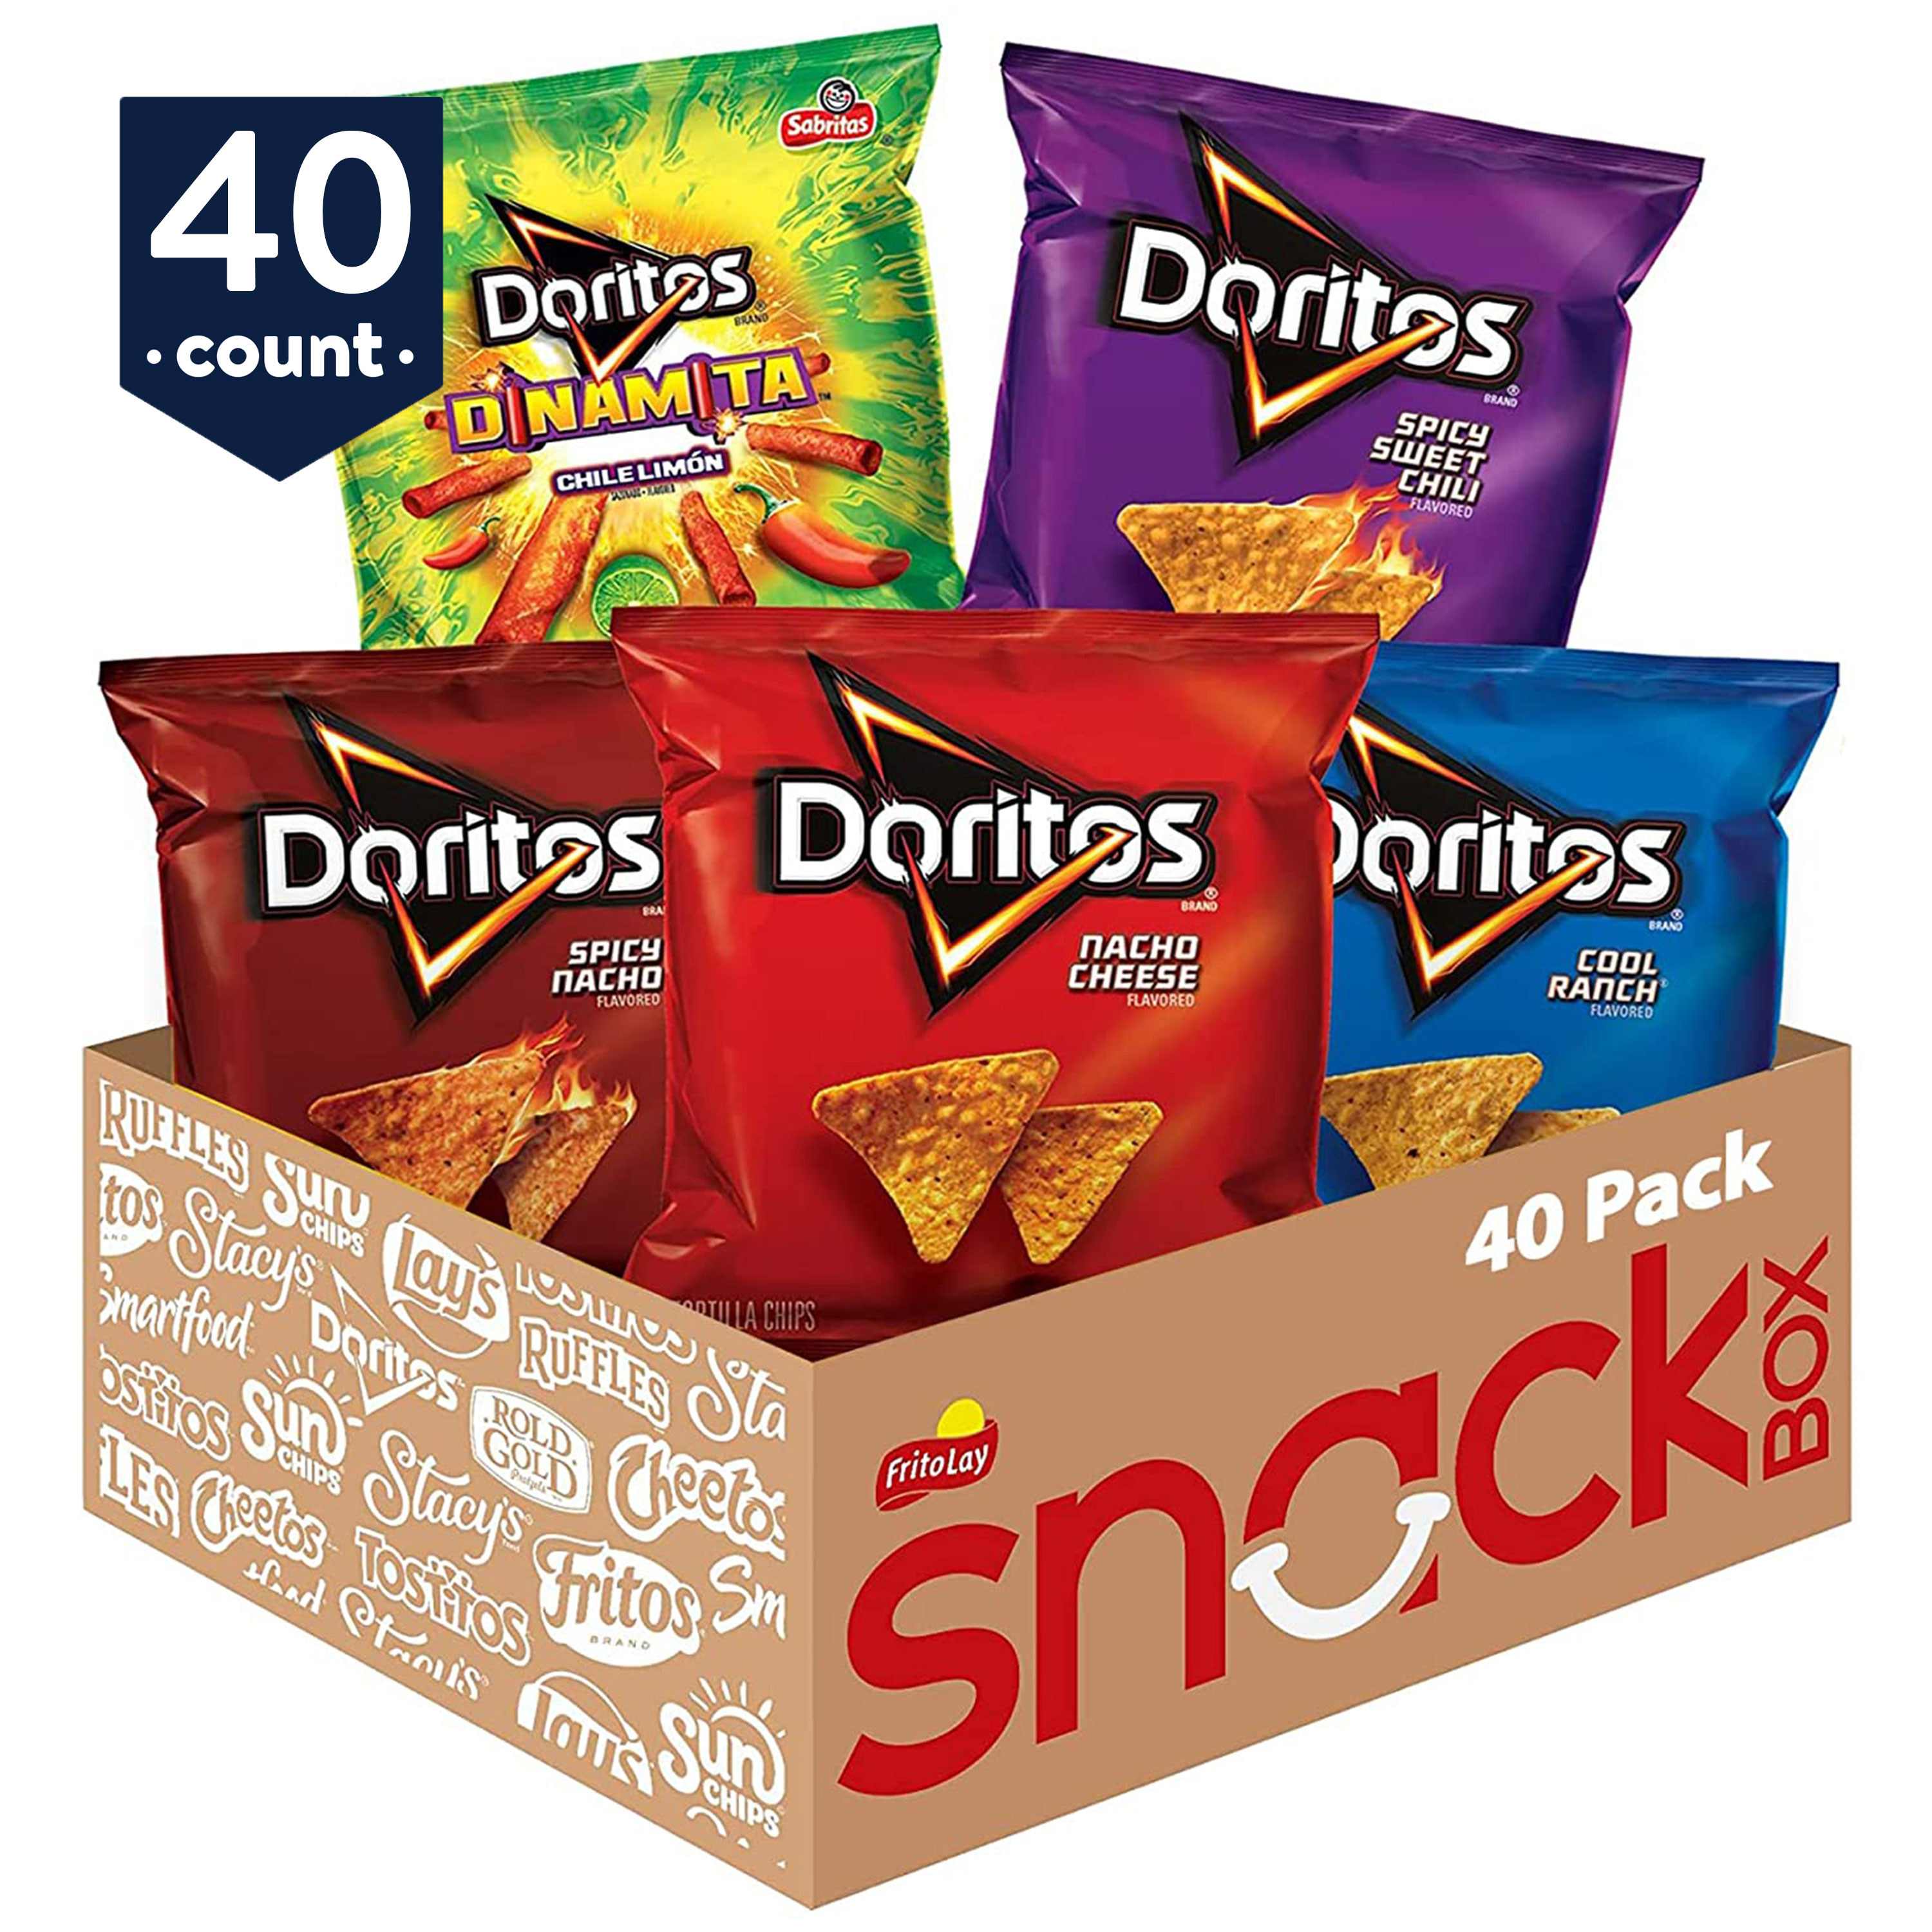 Doritos Flavored Tortilla Chip Variety Pack, 40 Count - image 1 of 6